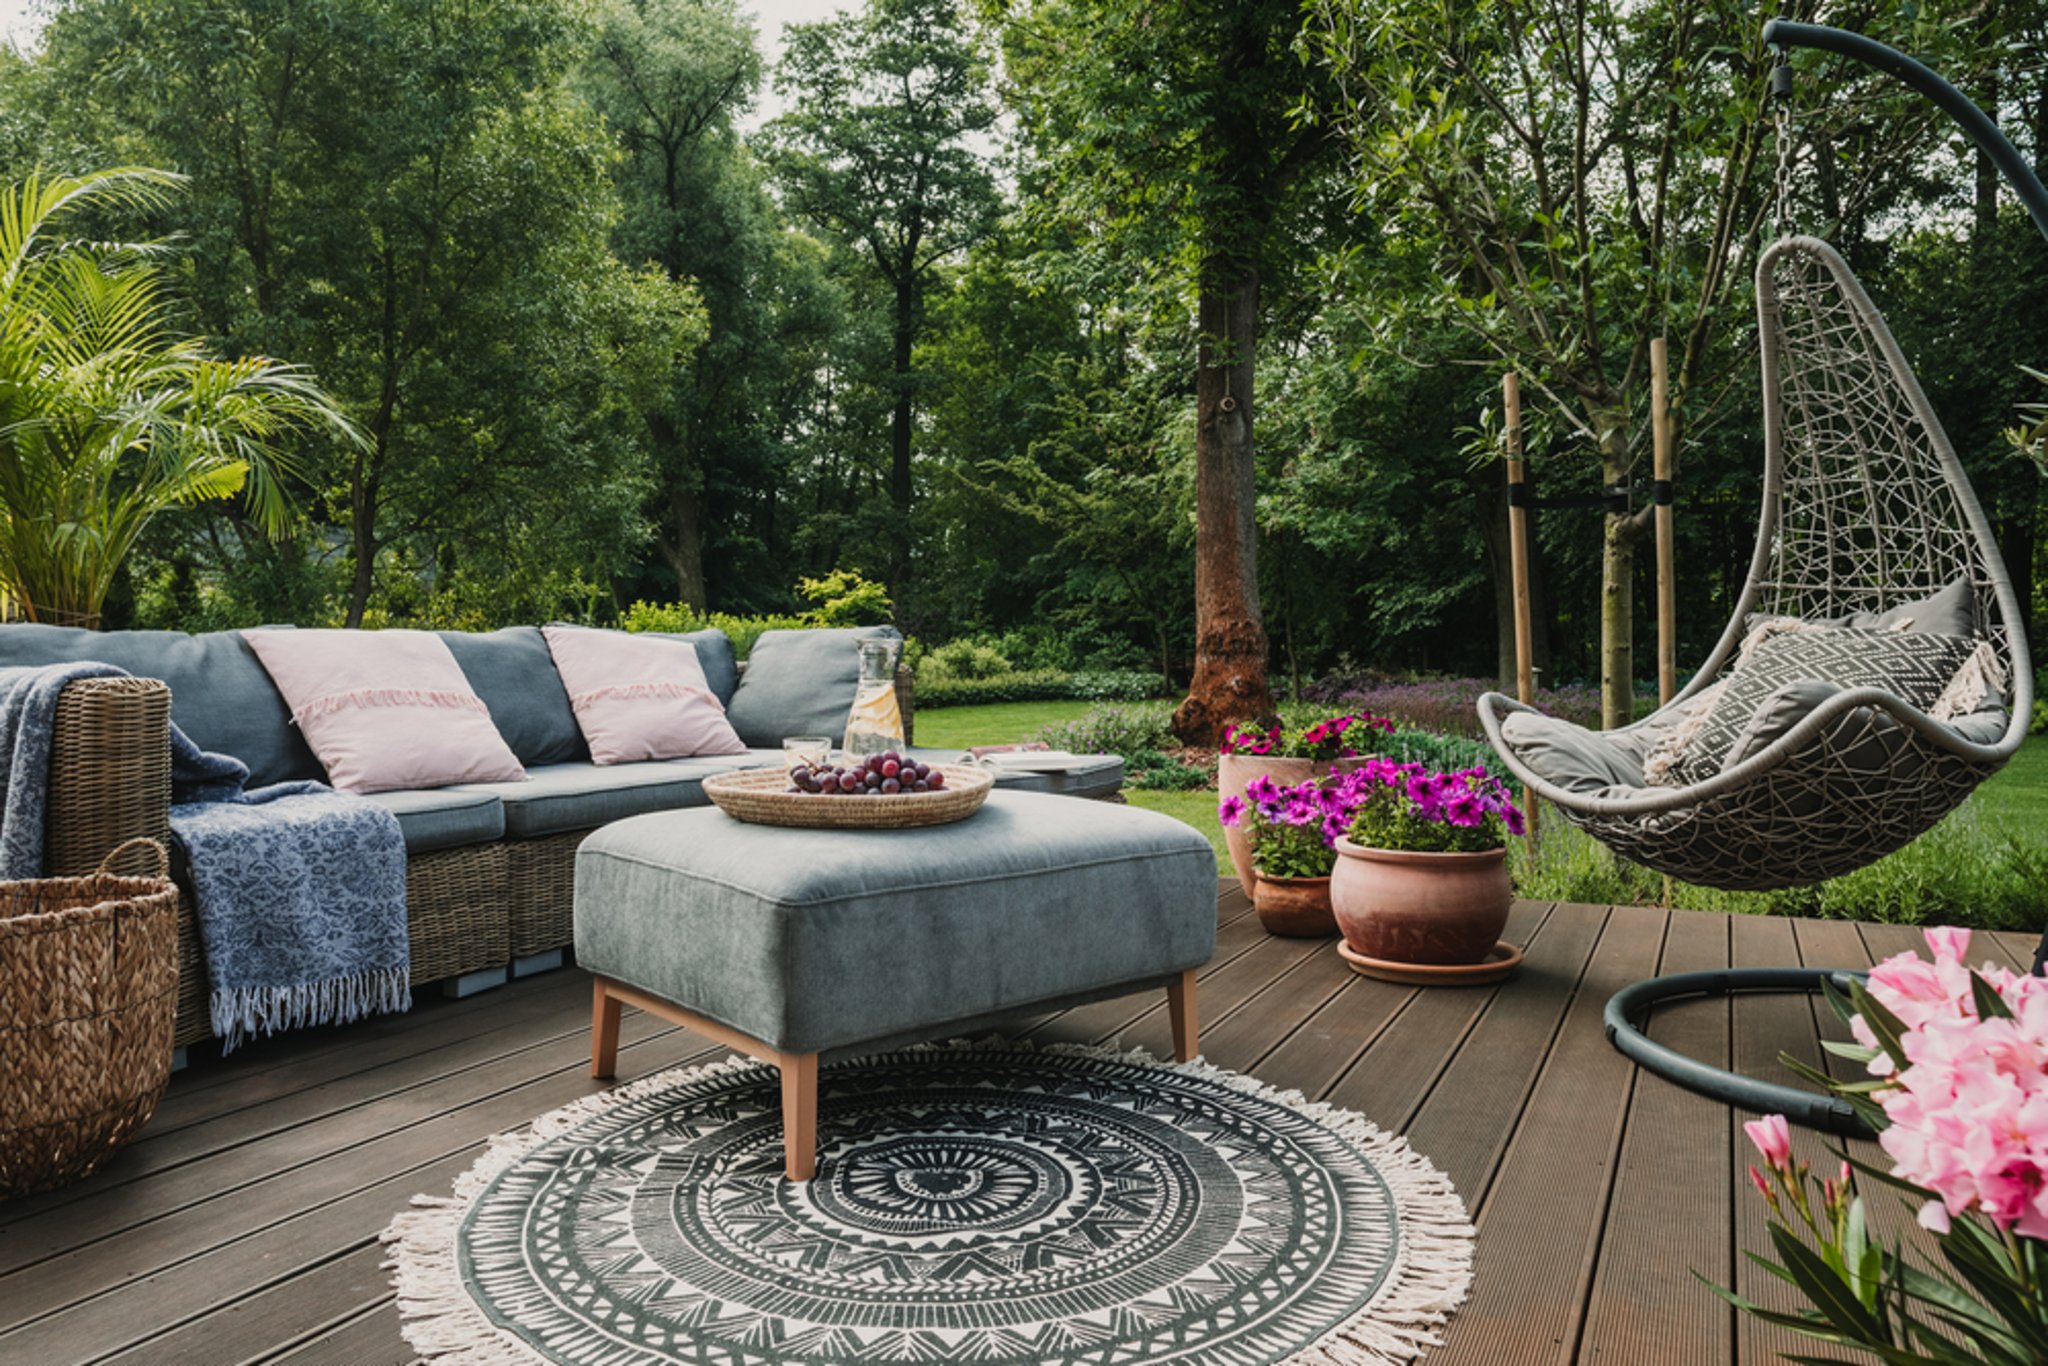 Best outdoor furniture in stock 2022, including outdoor tables and chairs